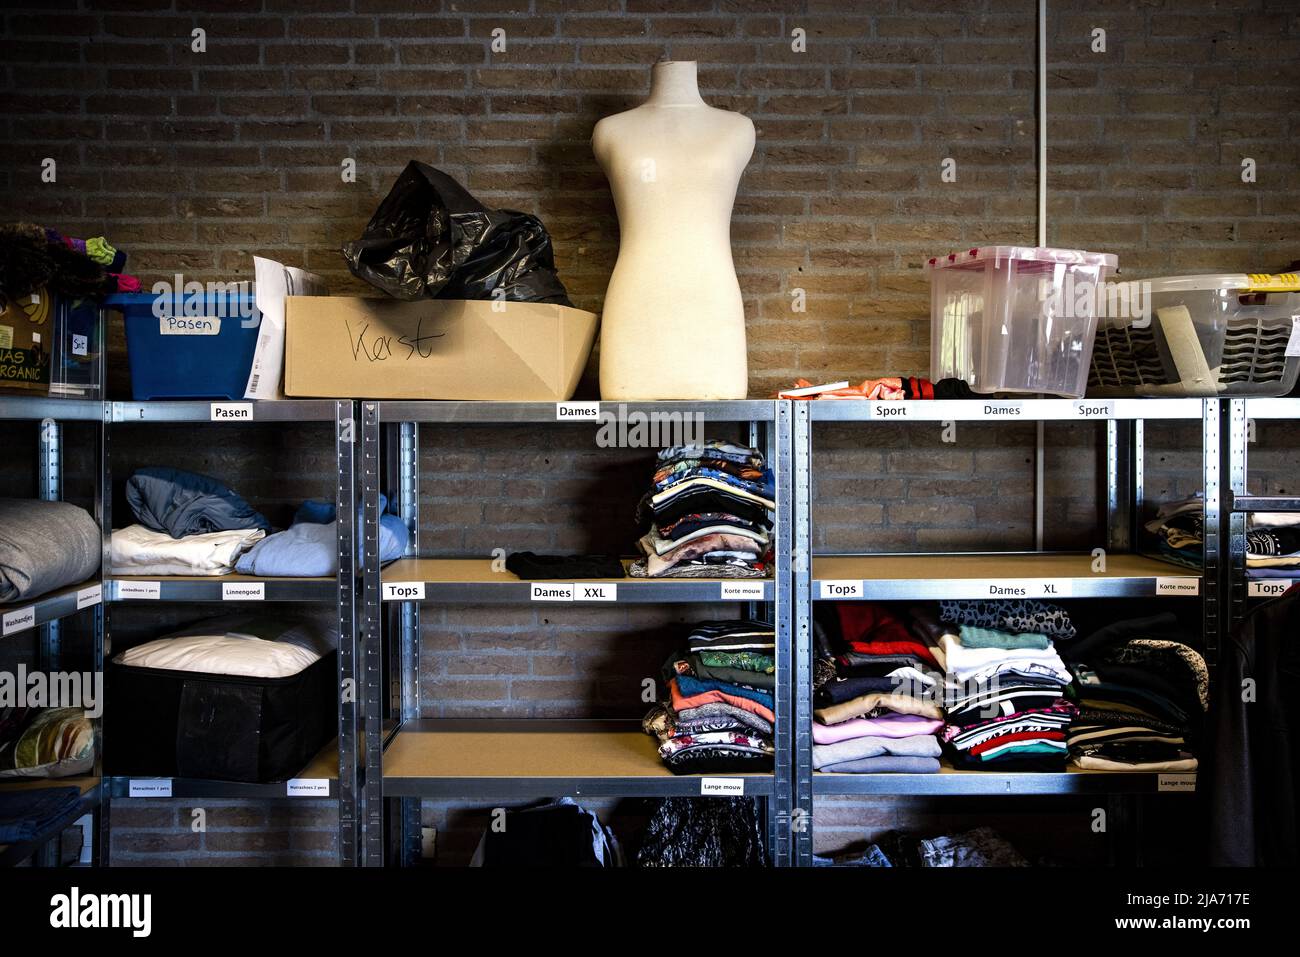 2022-05-28 10:43:13 EGMOND AAN DEN HOEF - Clothes that have just arrived at  Clothing Bank Noord-Holland Noord. Started as a clothing bank, food is now  also distributed to people who are in